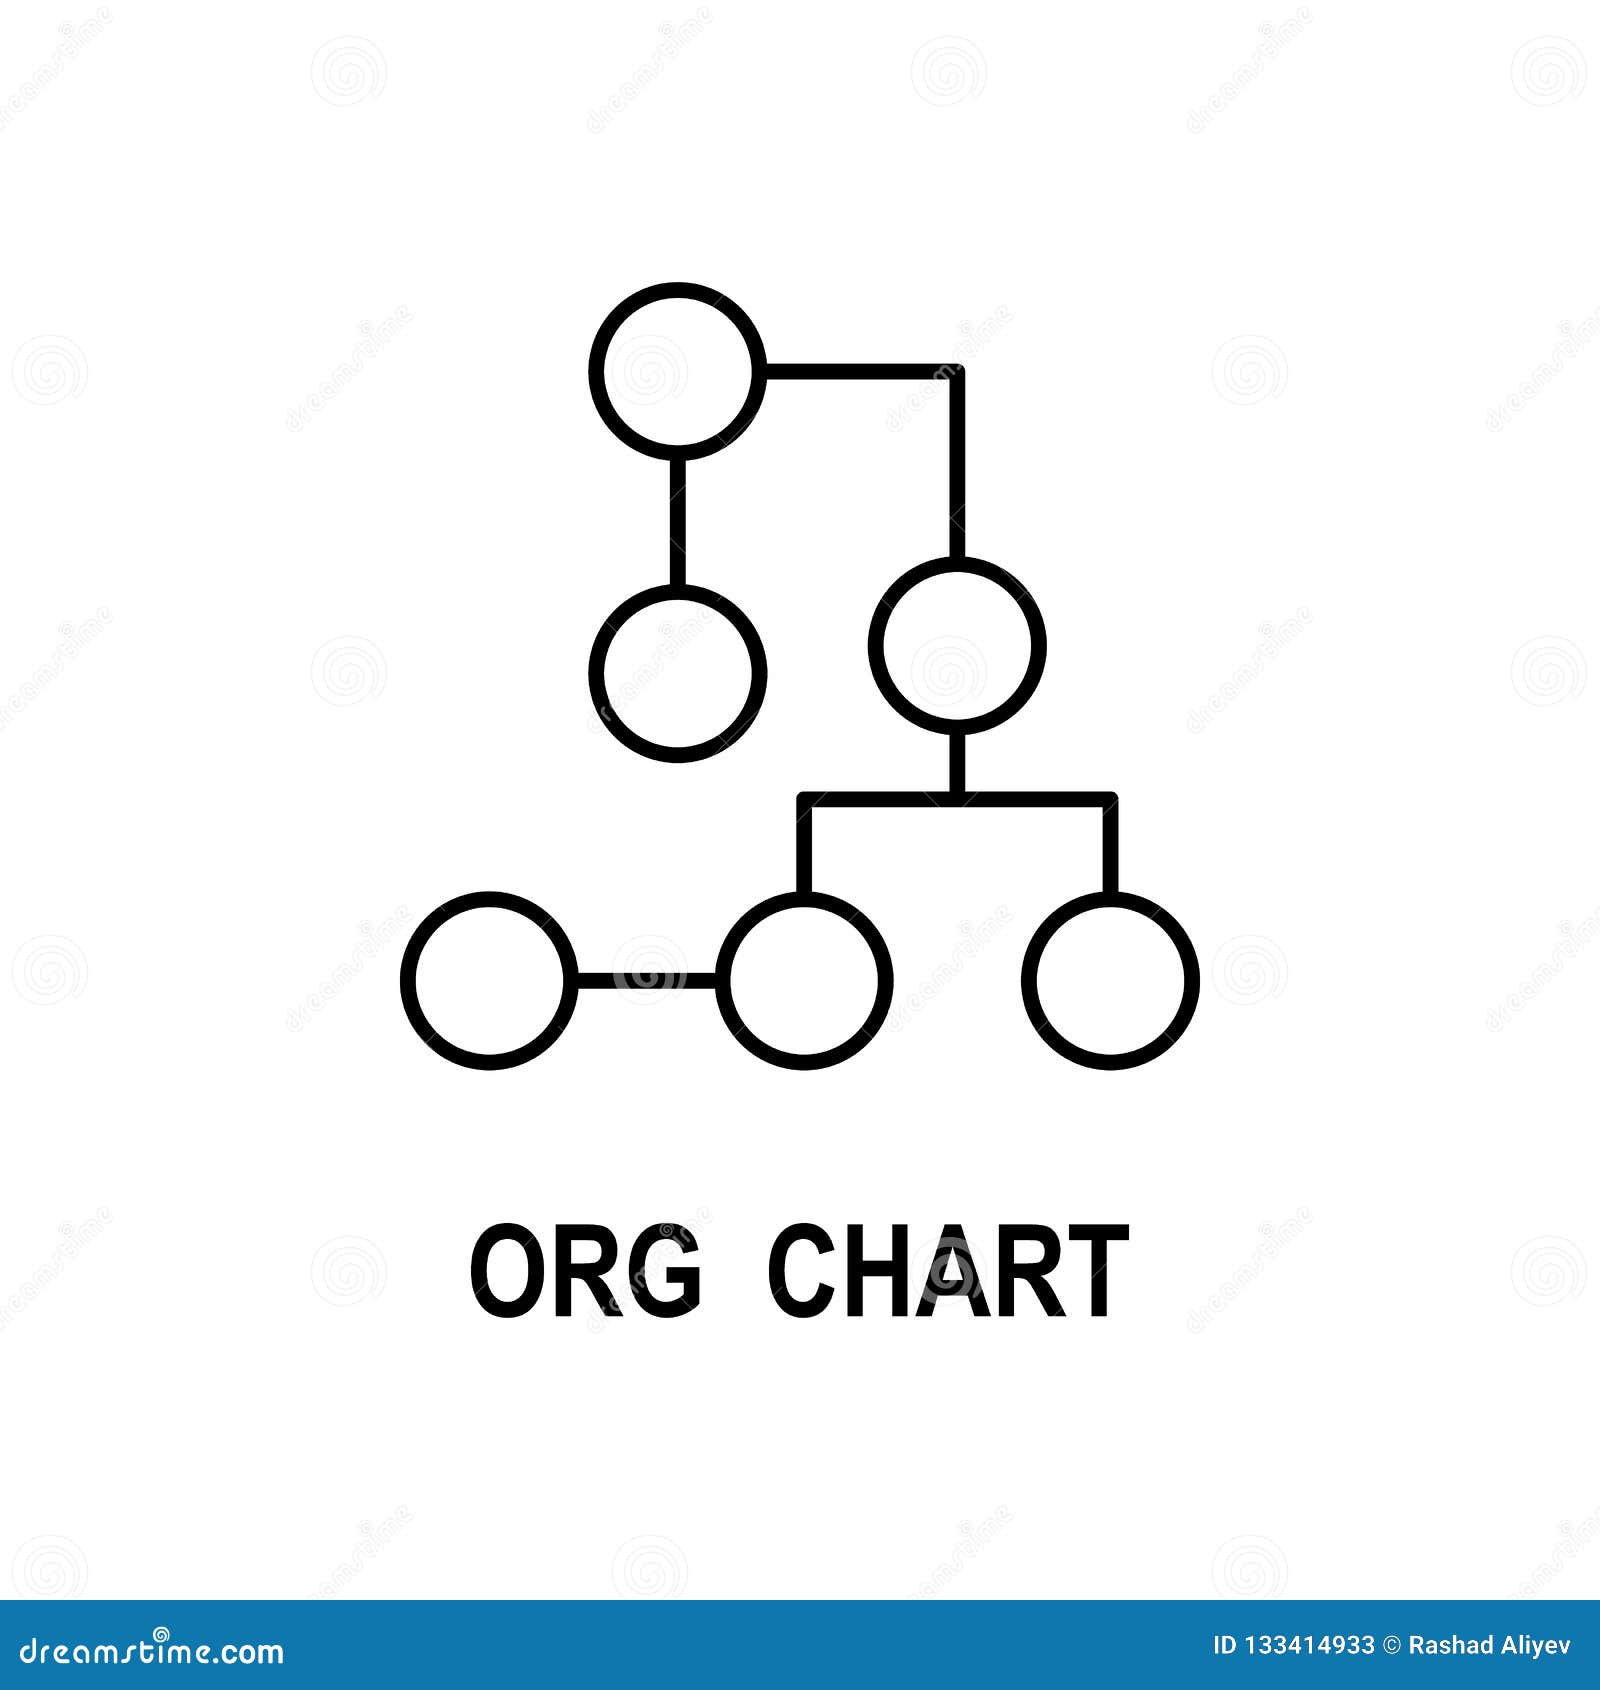 What Is An Organizational Chart Used For